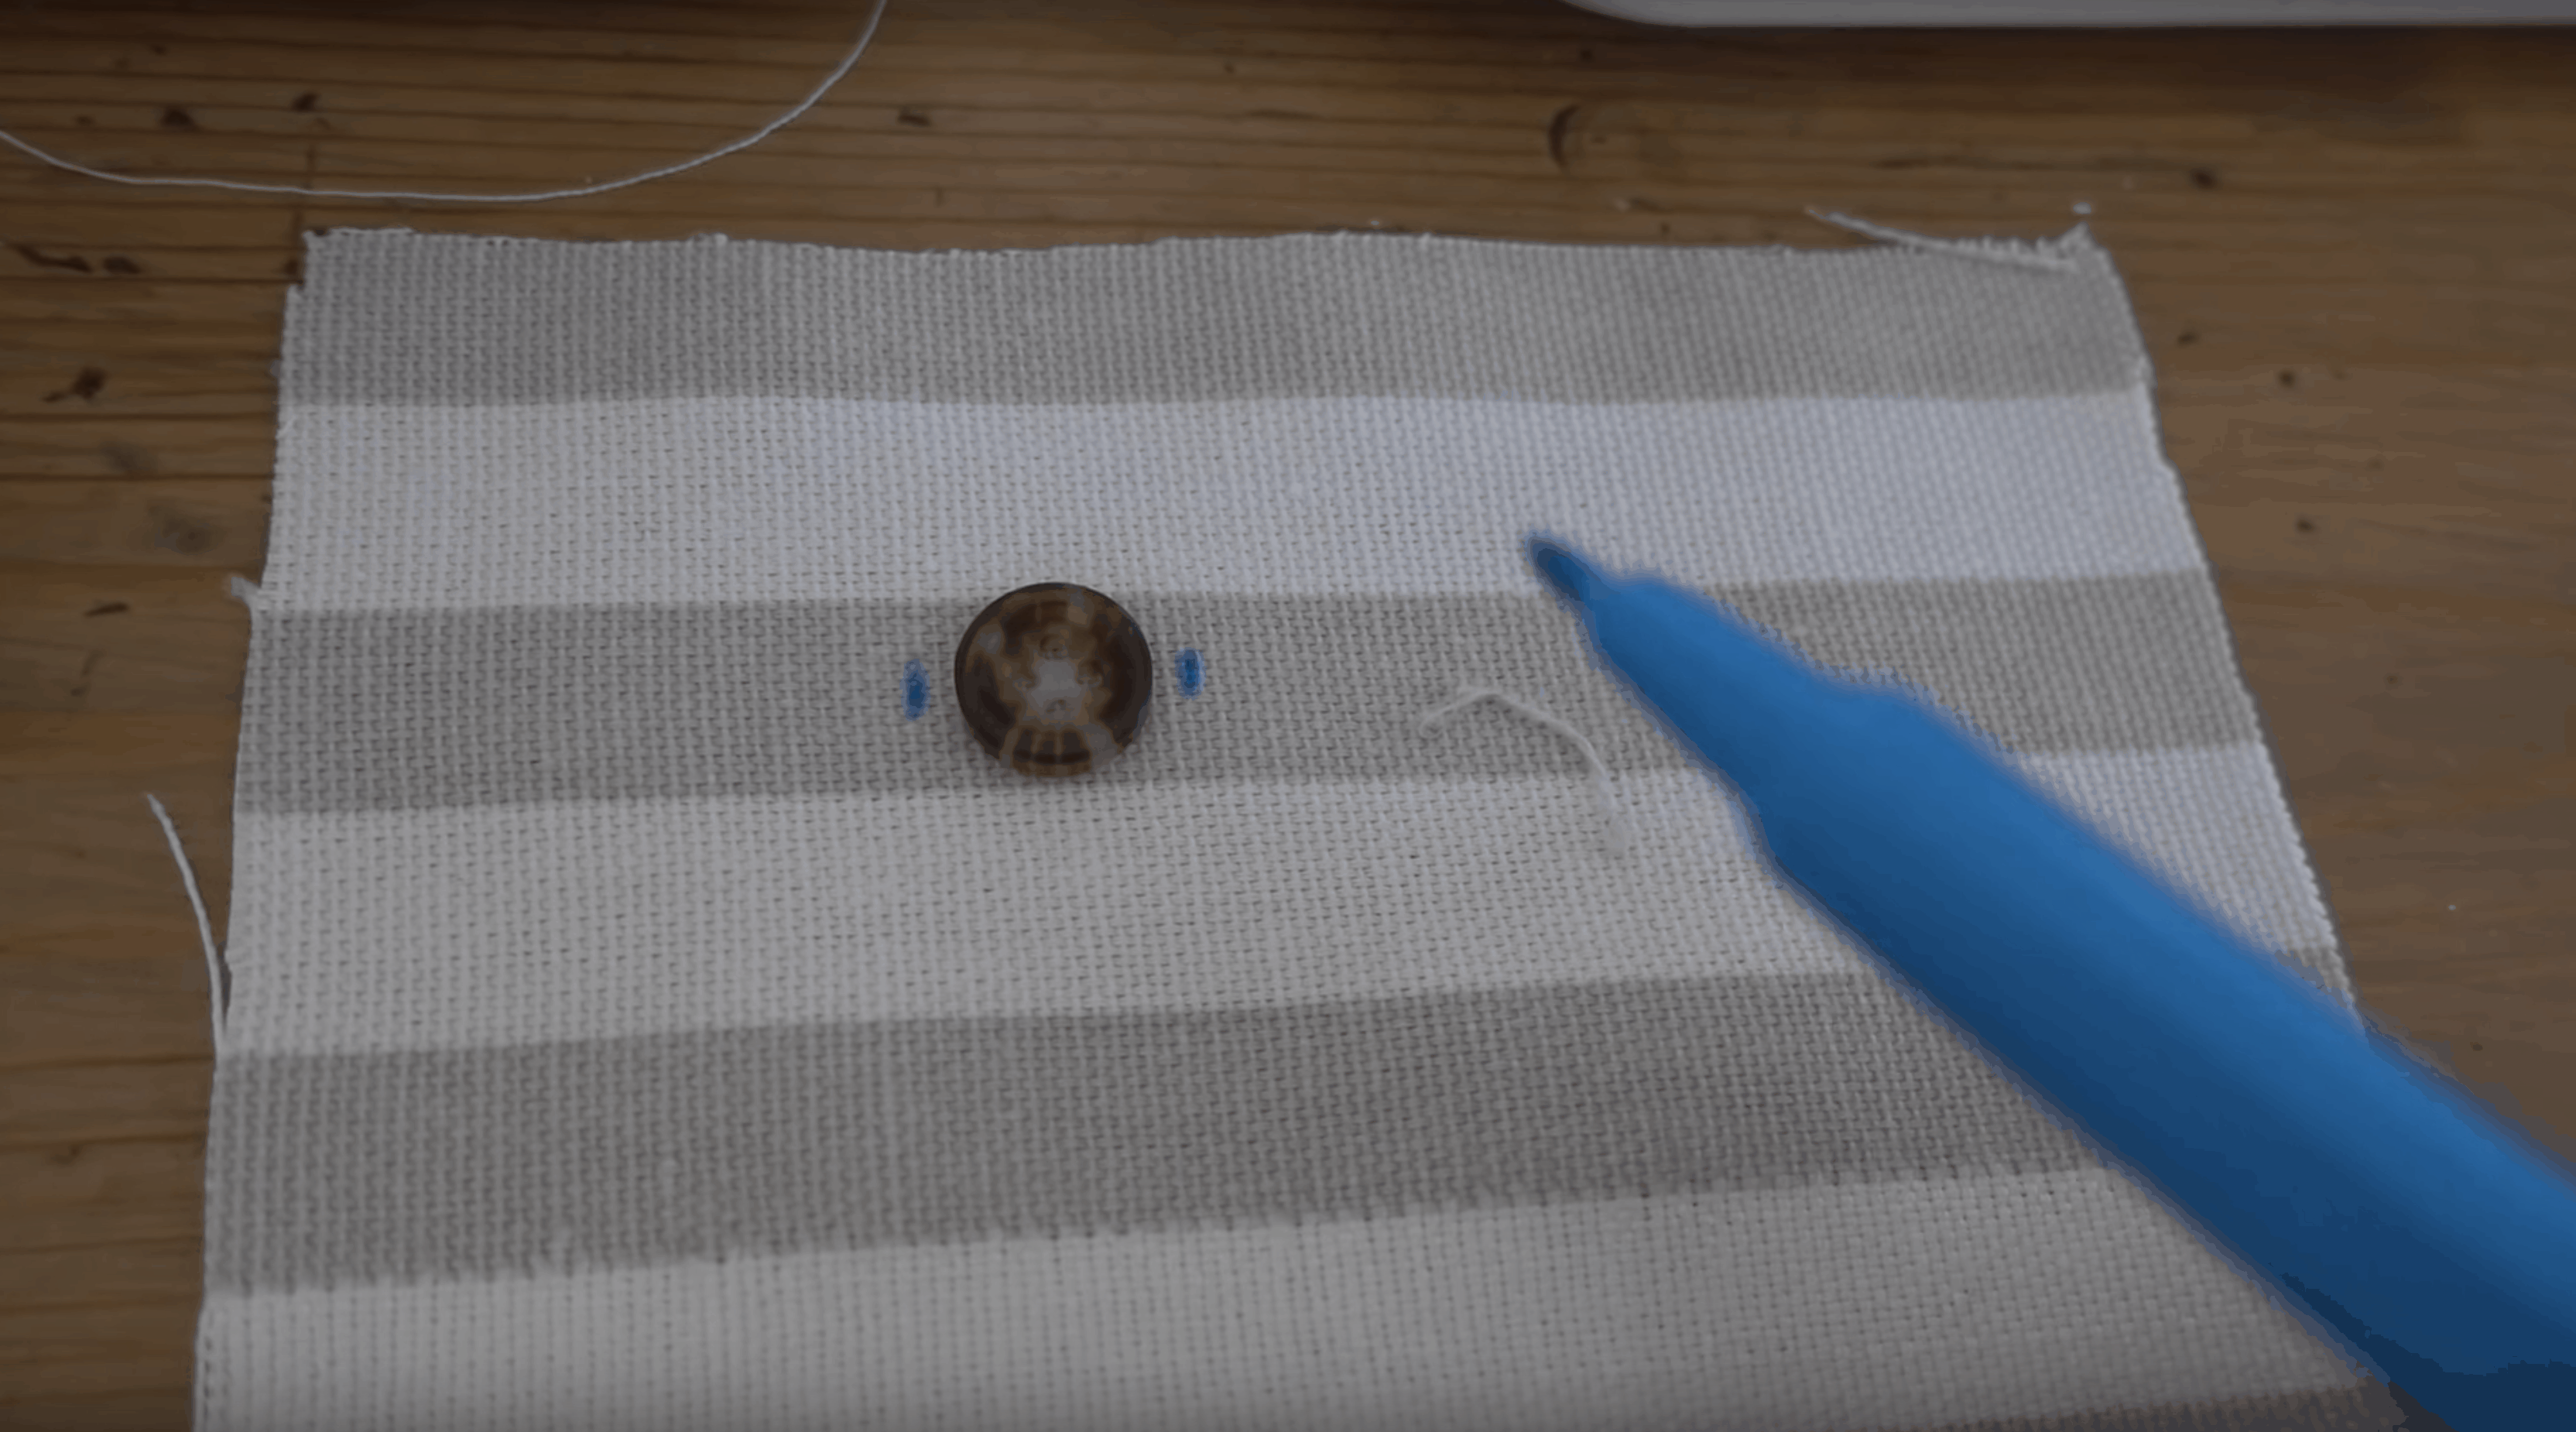 Marking the Button Hole with Two Small Dots - how to make a buttonhole